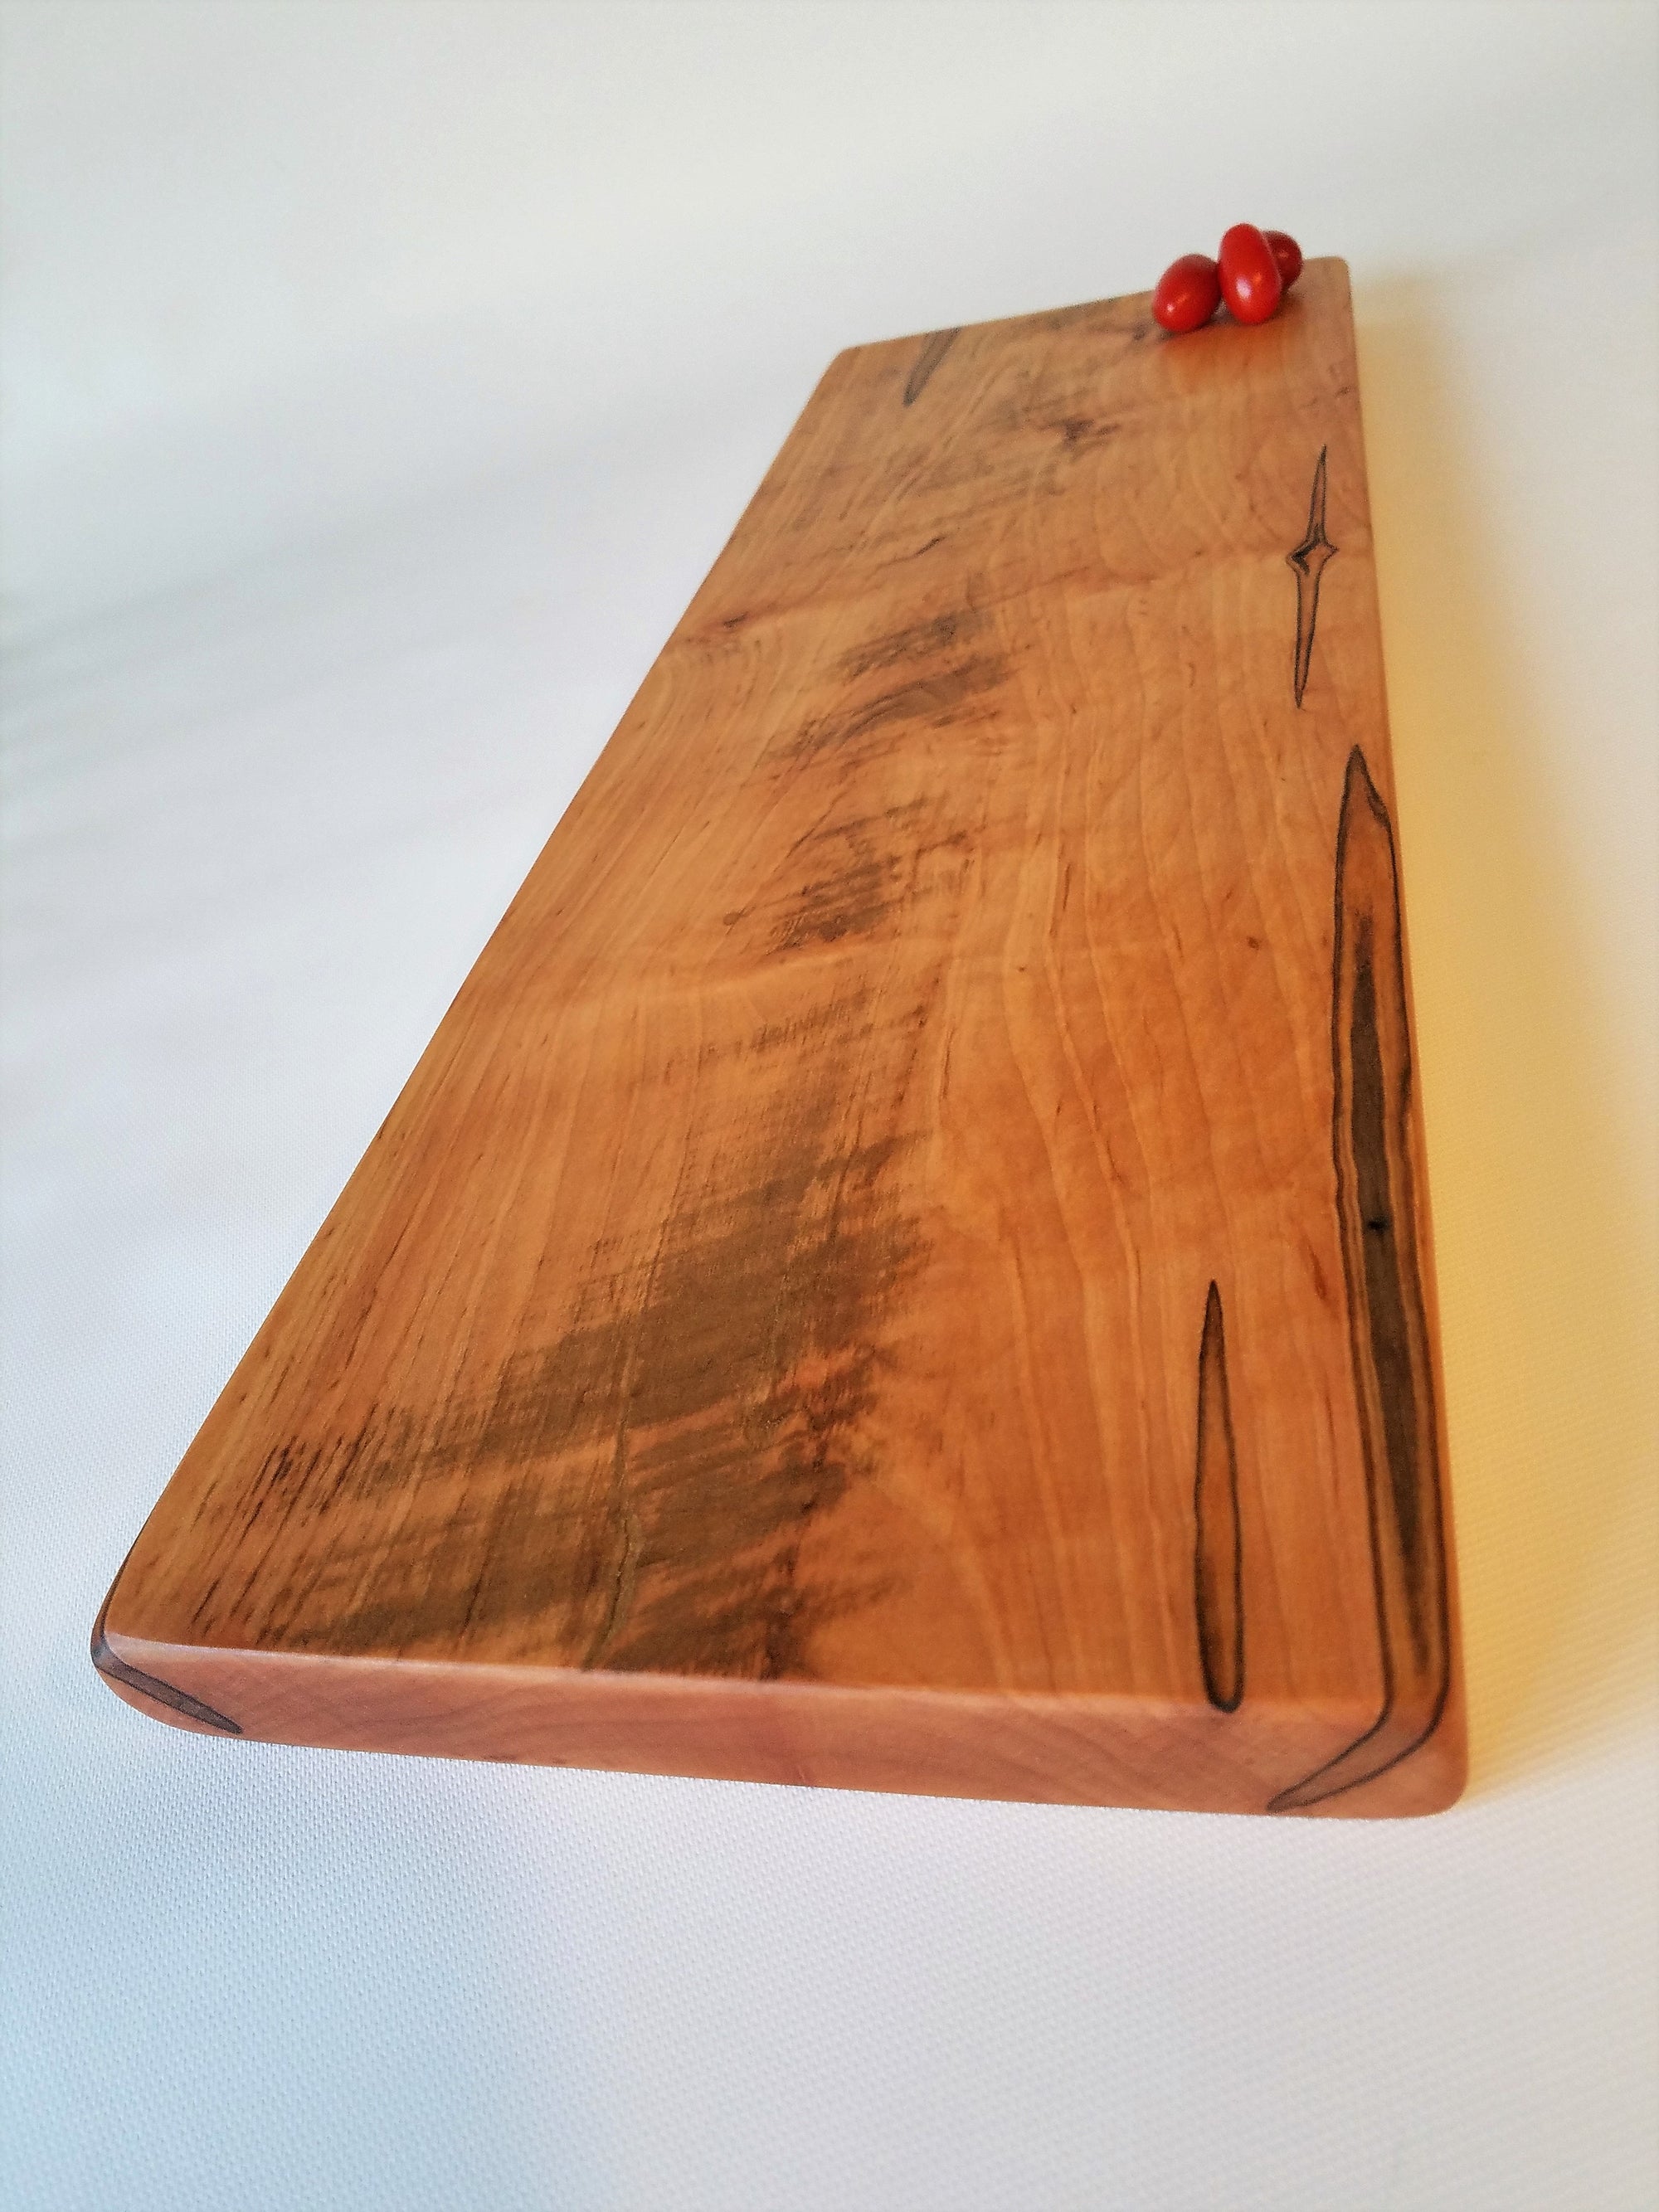 Wooden Serving Board- Reclaimed Wood- Charcuterie- Cheese Board- Cutting Board- Gift- Foodie- Chef- Party- Reclaimed Wood- Ambrosia Maple